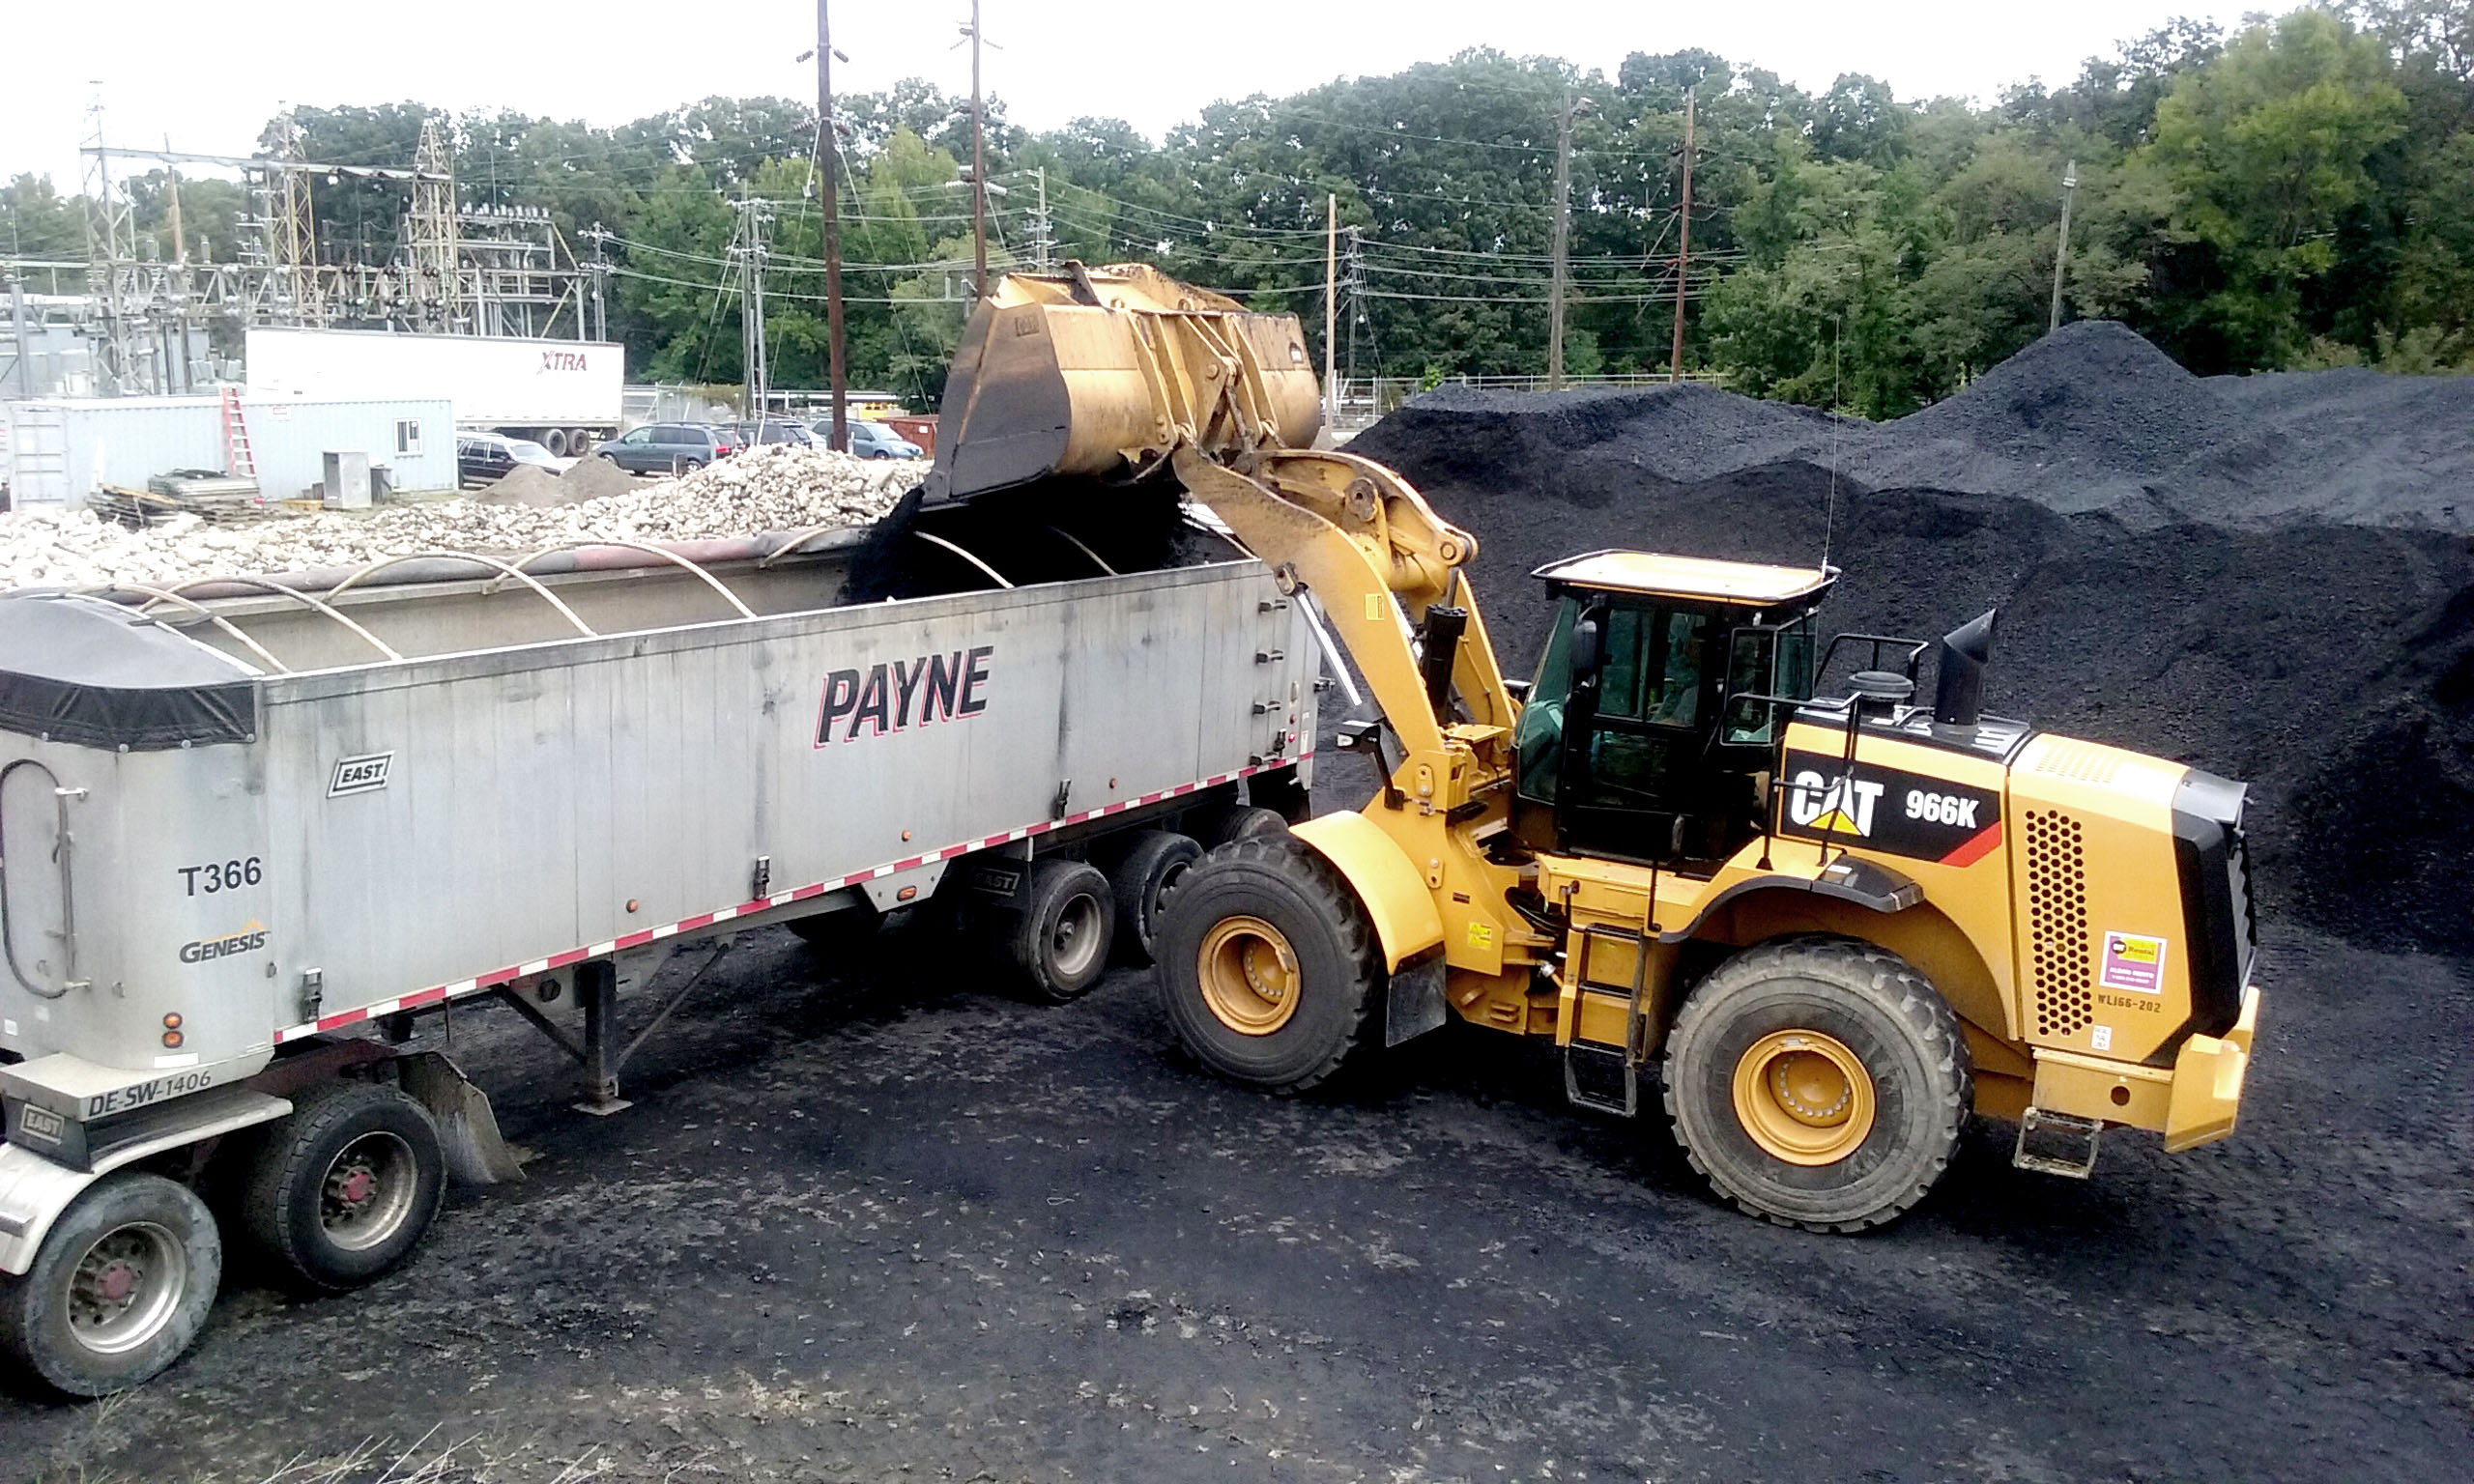 BITUMINOUS COAL REMOVED FROM SHUTTERED POWER PLANT WITH HELP FROM DLA DISPOSITION SERVICES